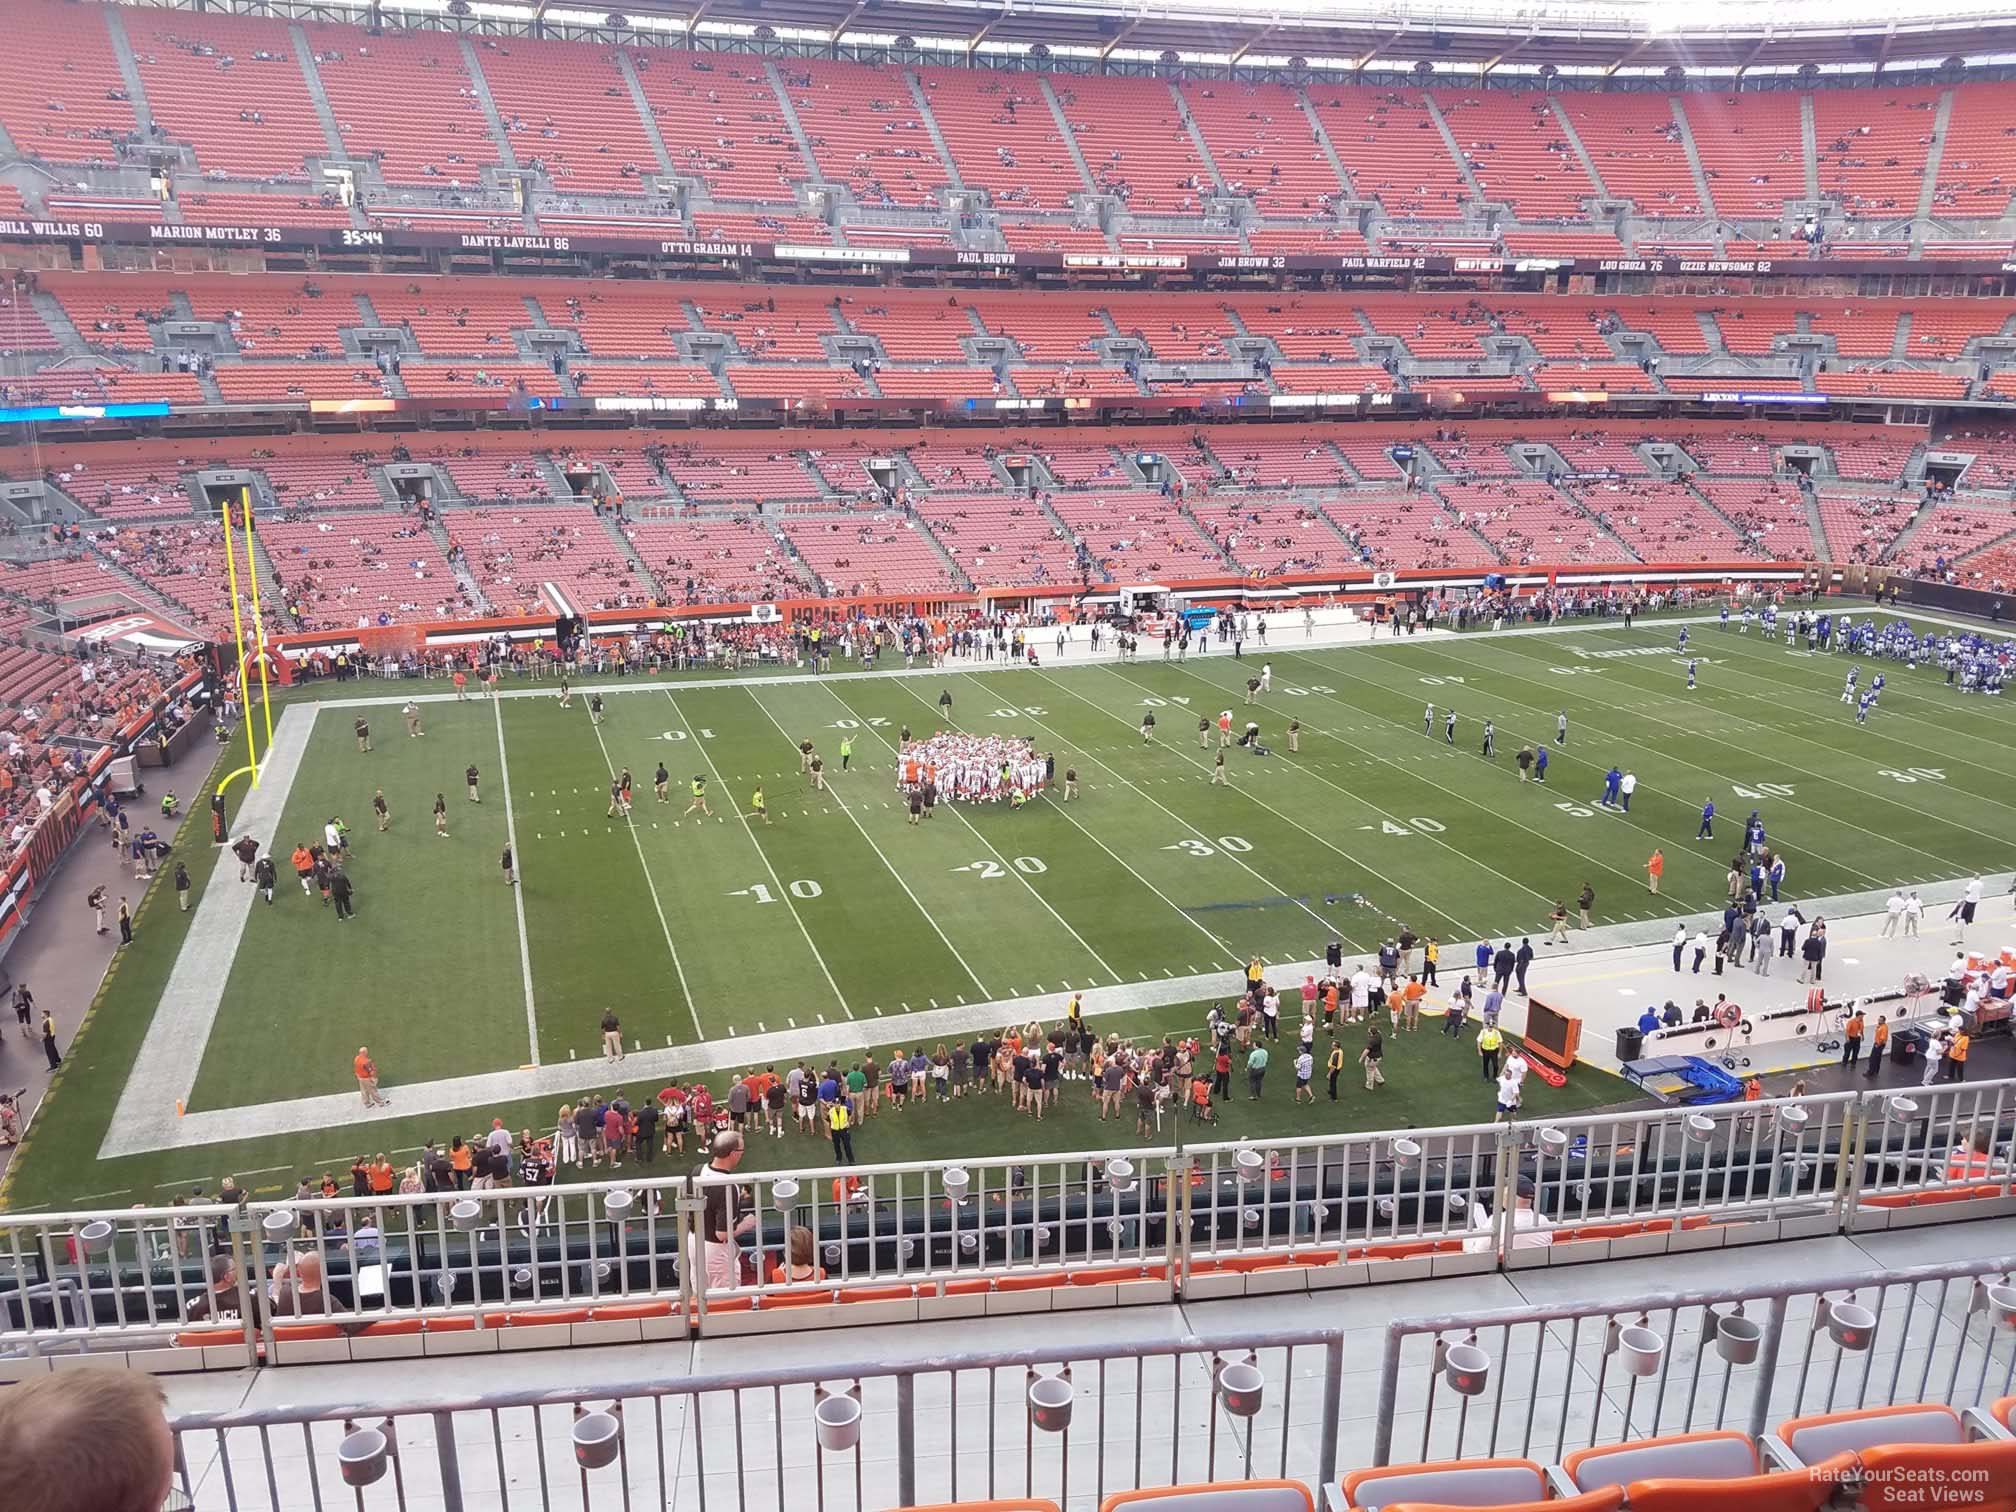 Club Level at Cleveland Browns Stadium during the Browns/Steelers